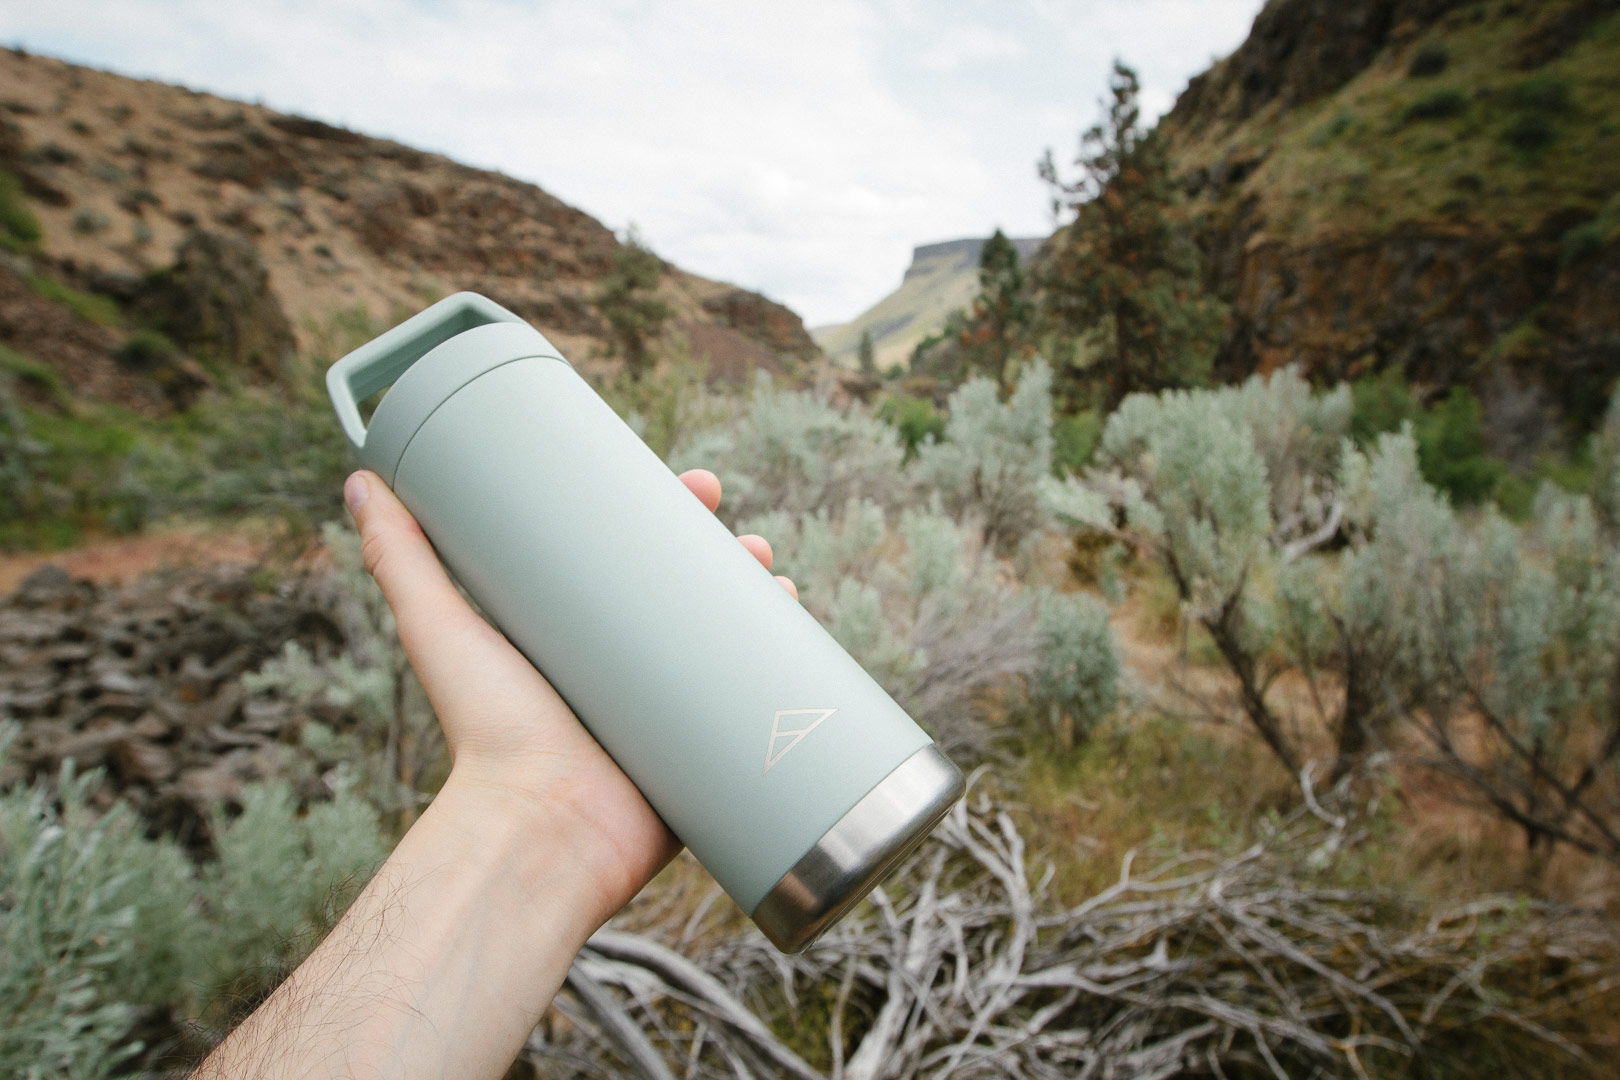 The New Metolius Water Bottle - Responsibly Made, and Built for a Lifetime